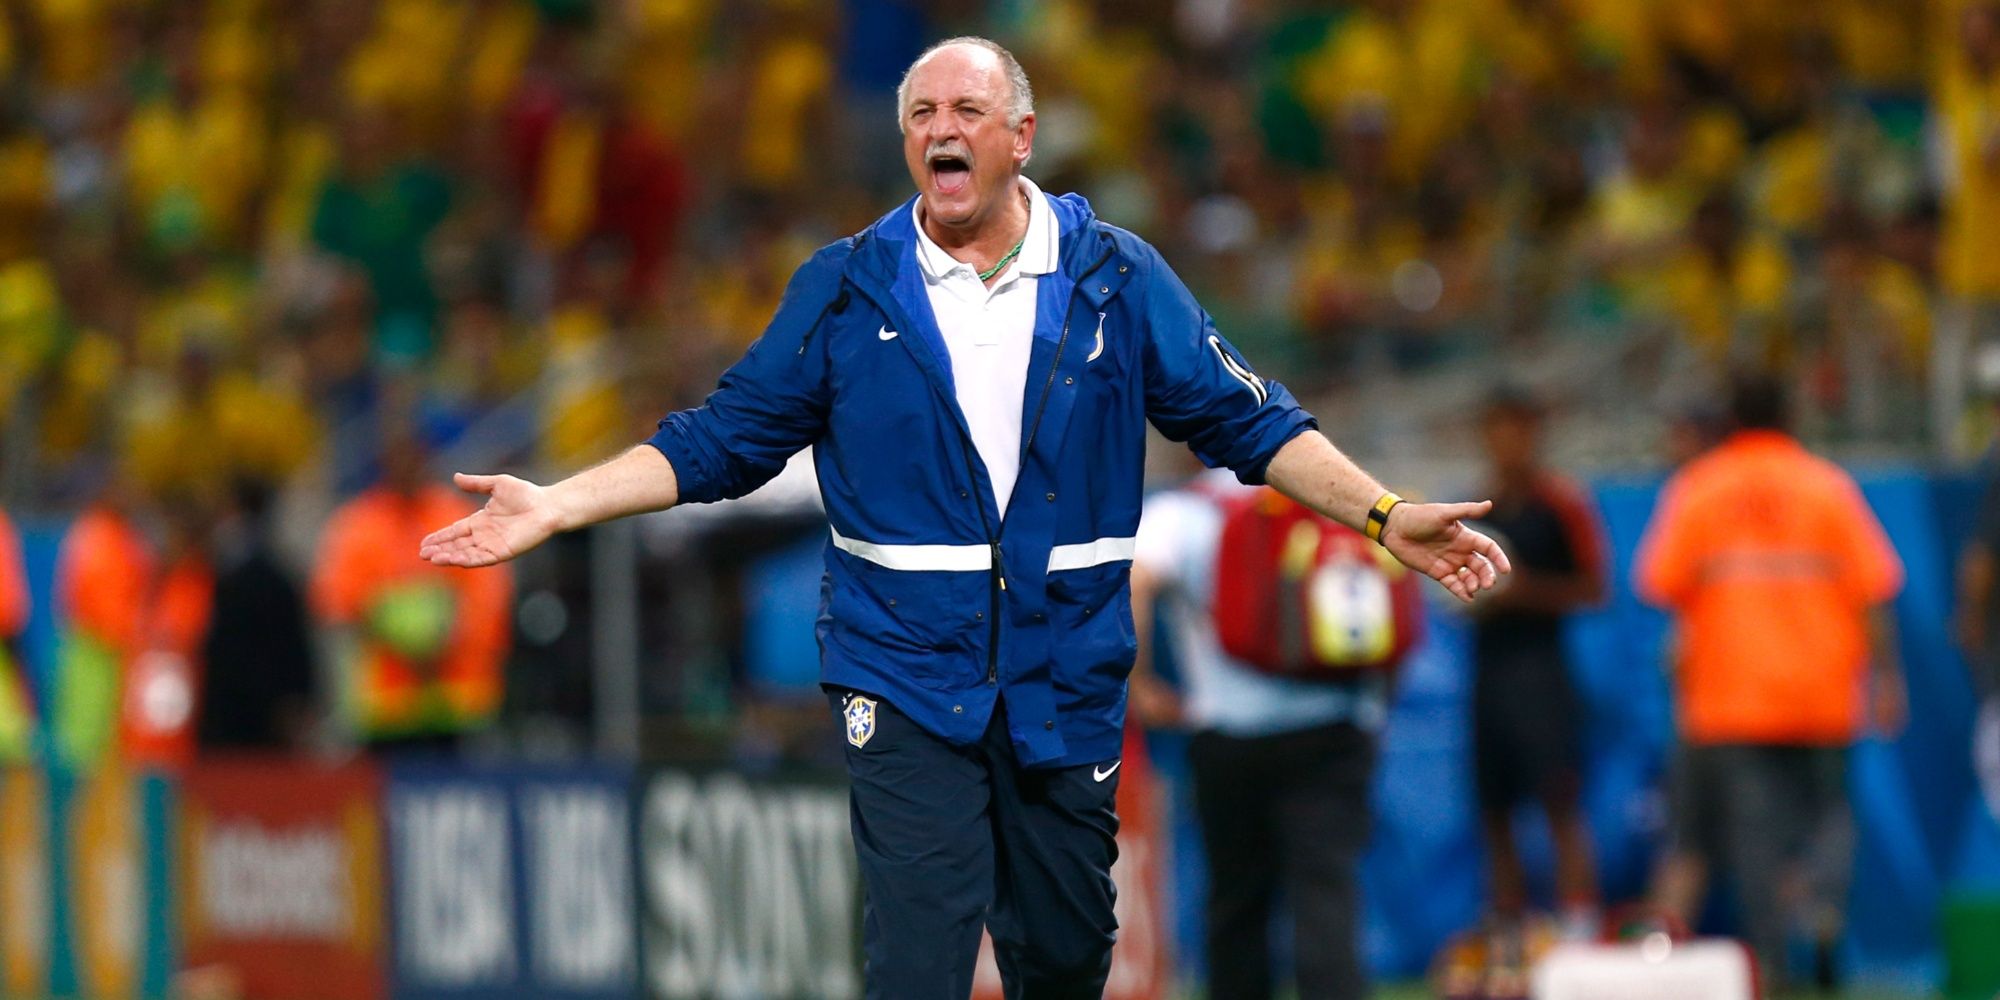 Luis Felipe Scolari has guided Brazil to two World Cups.